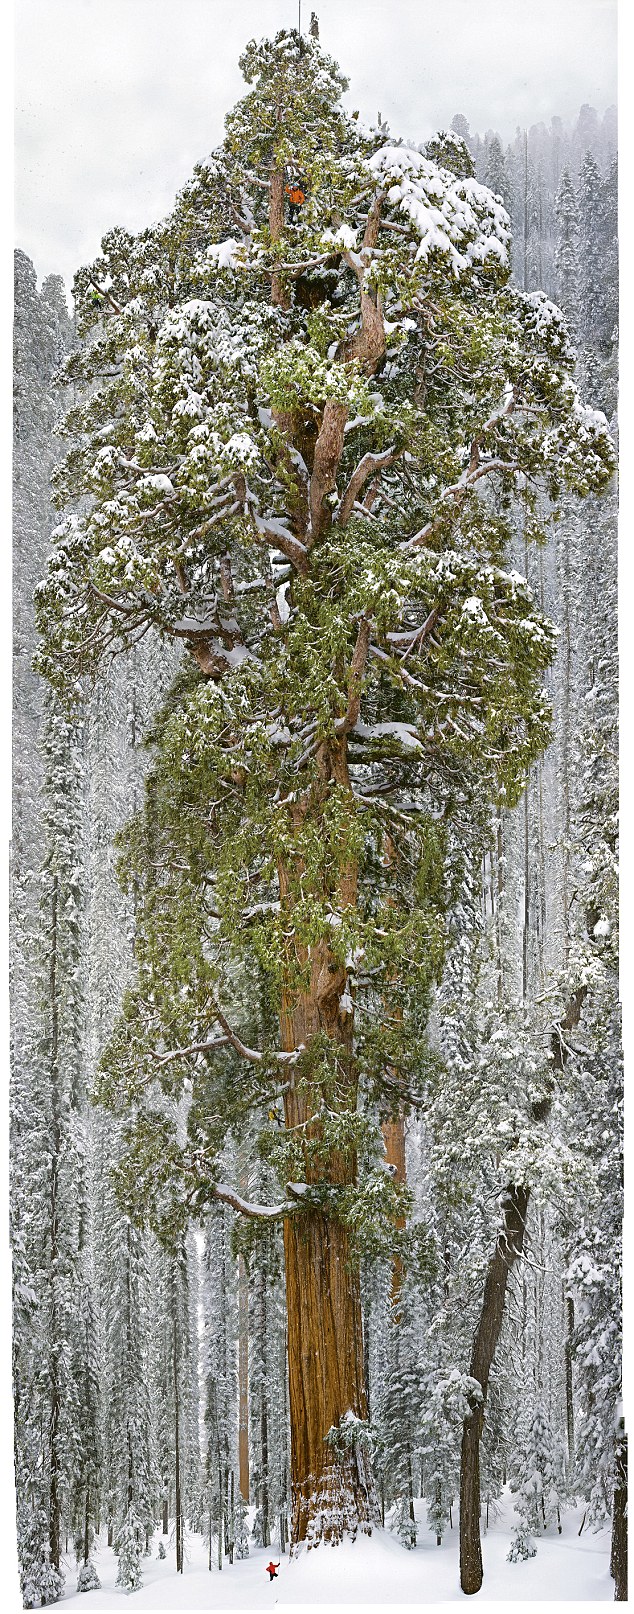 A team of scientists measure a giant sequoia, called the President.